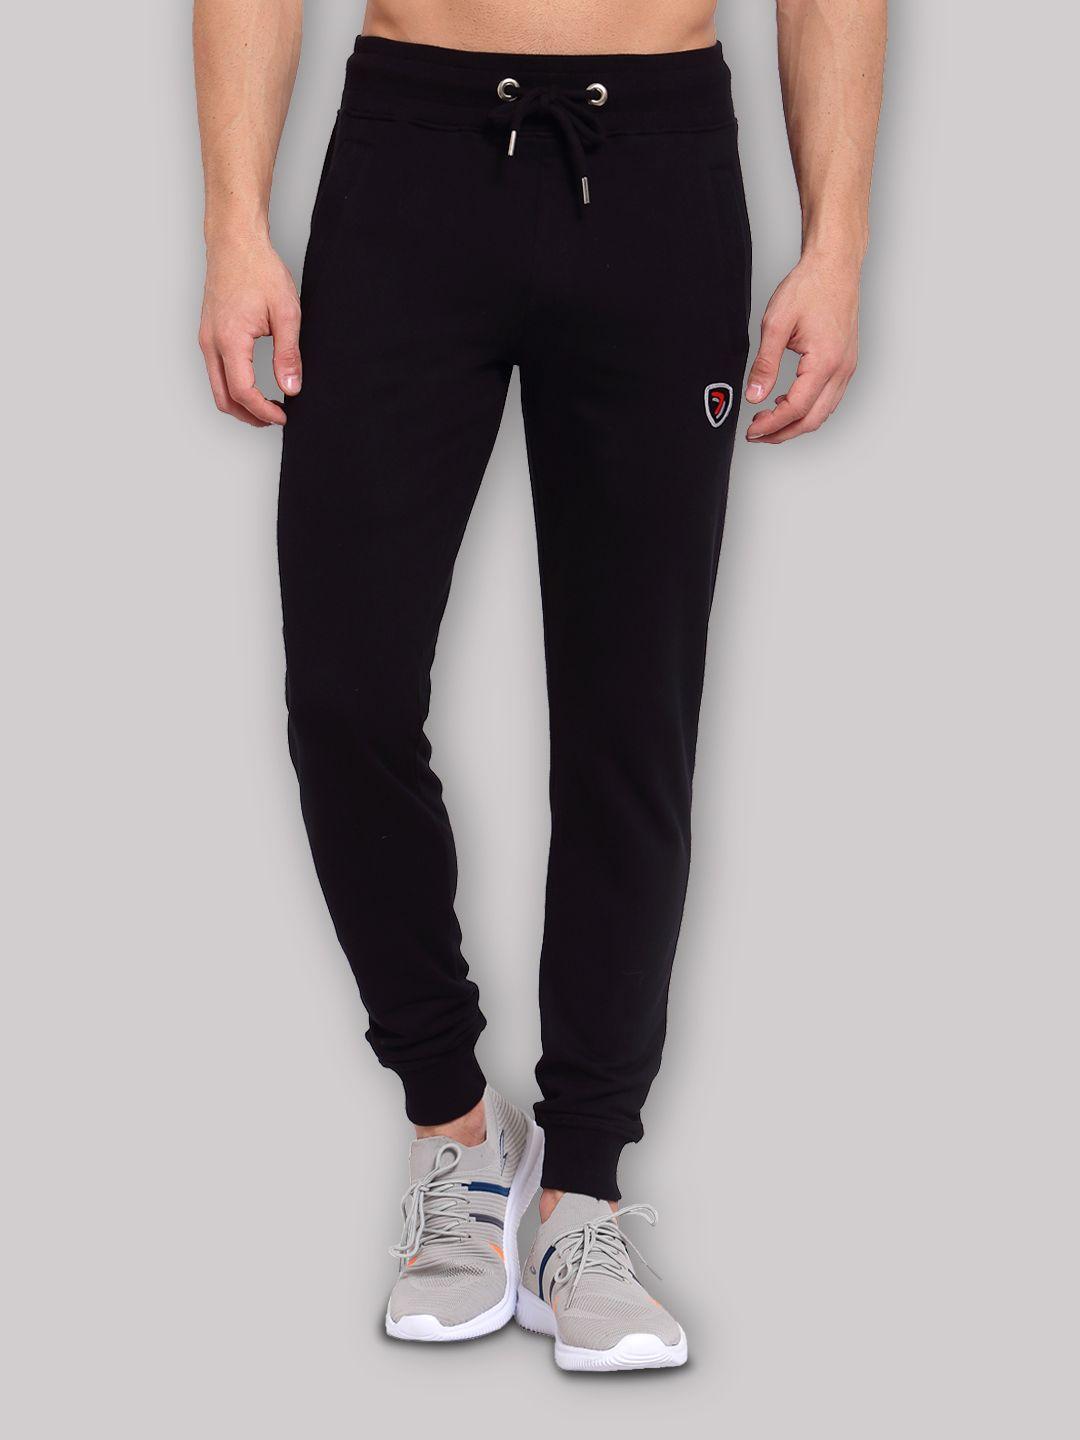 sporto-men-black-solid-cotton-slim-fit-sports-track-pant-with-dual-zipper-side-pockets